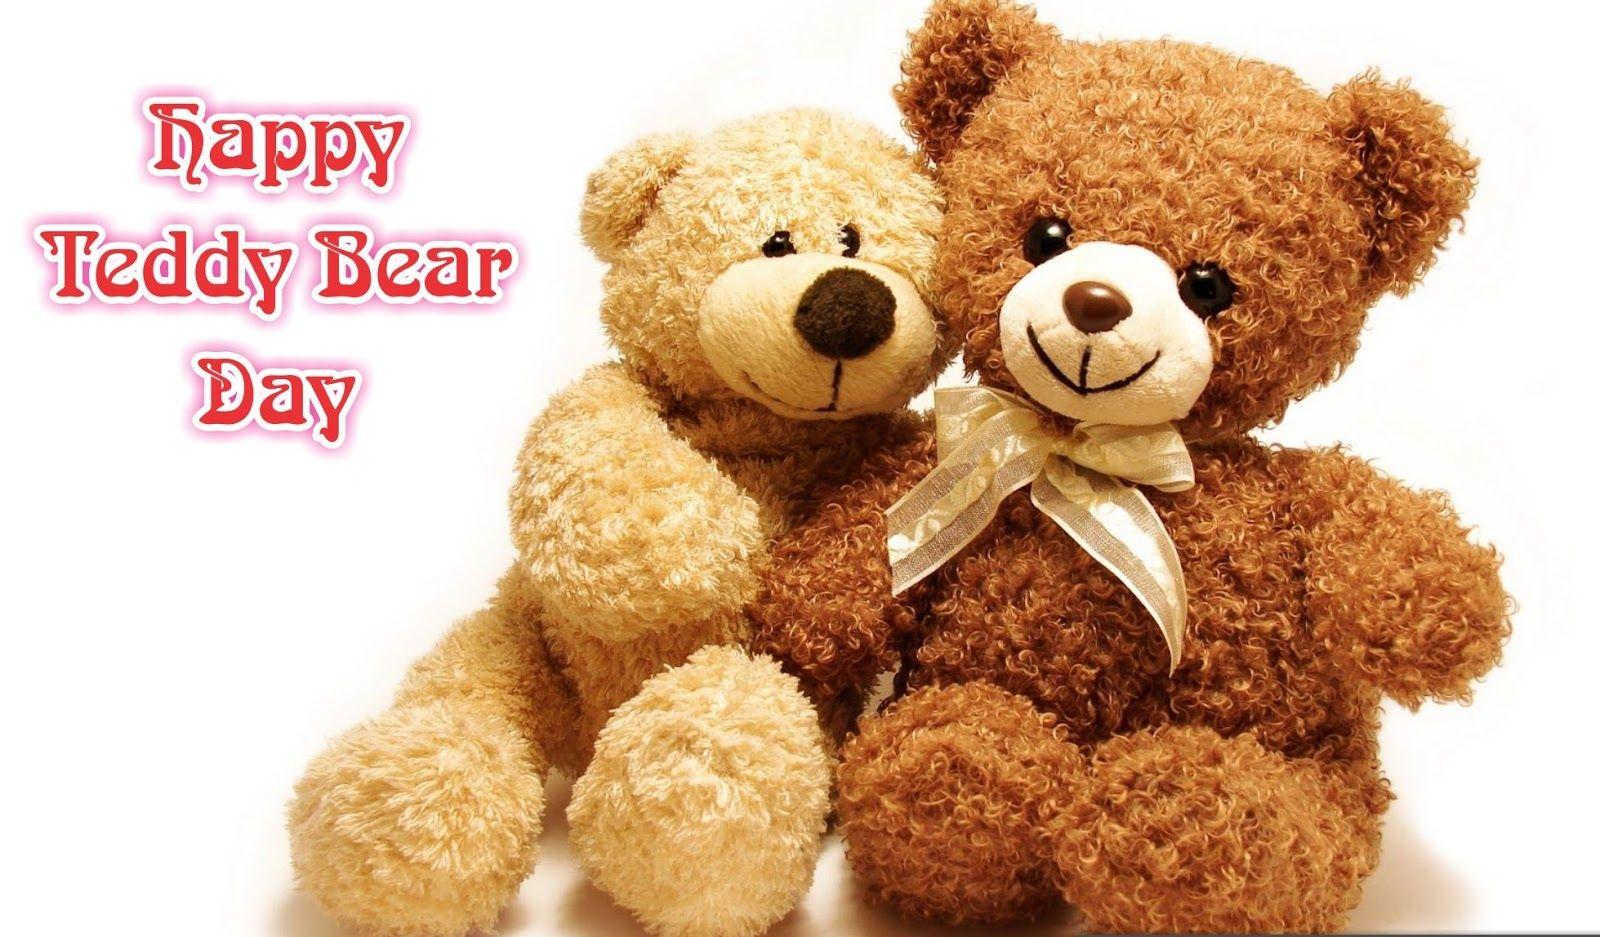 Happy Teddy Day 2018 HD 3D Image, Wallpaper, Picture